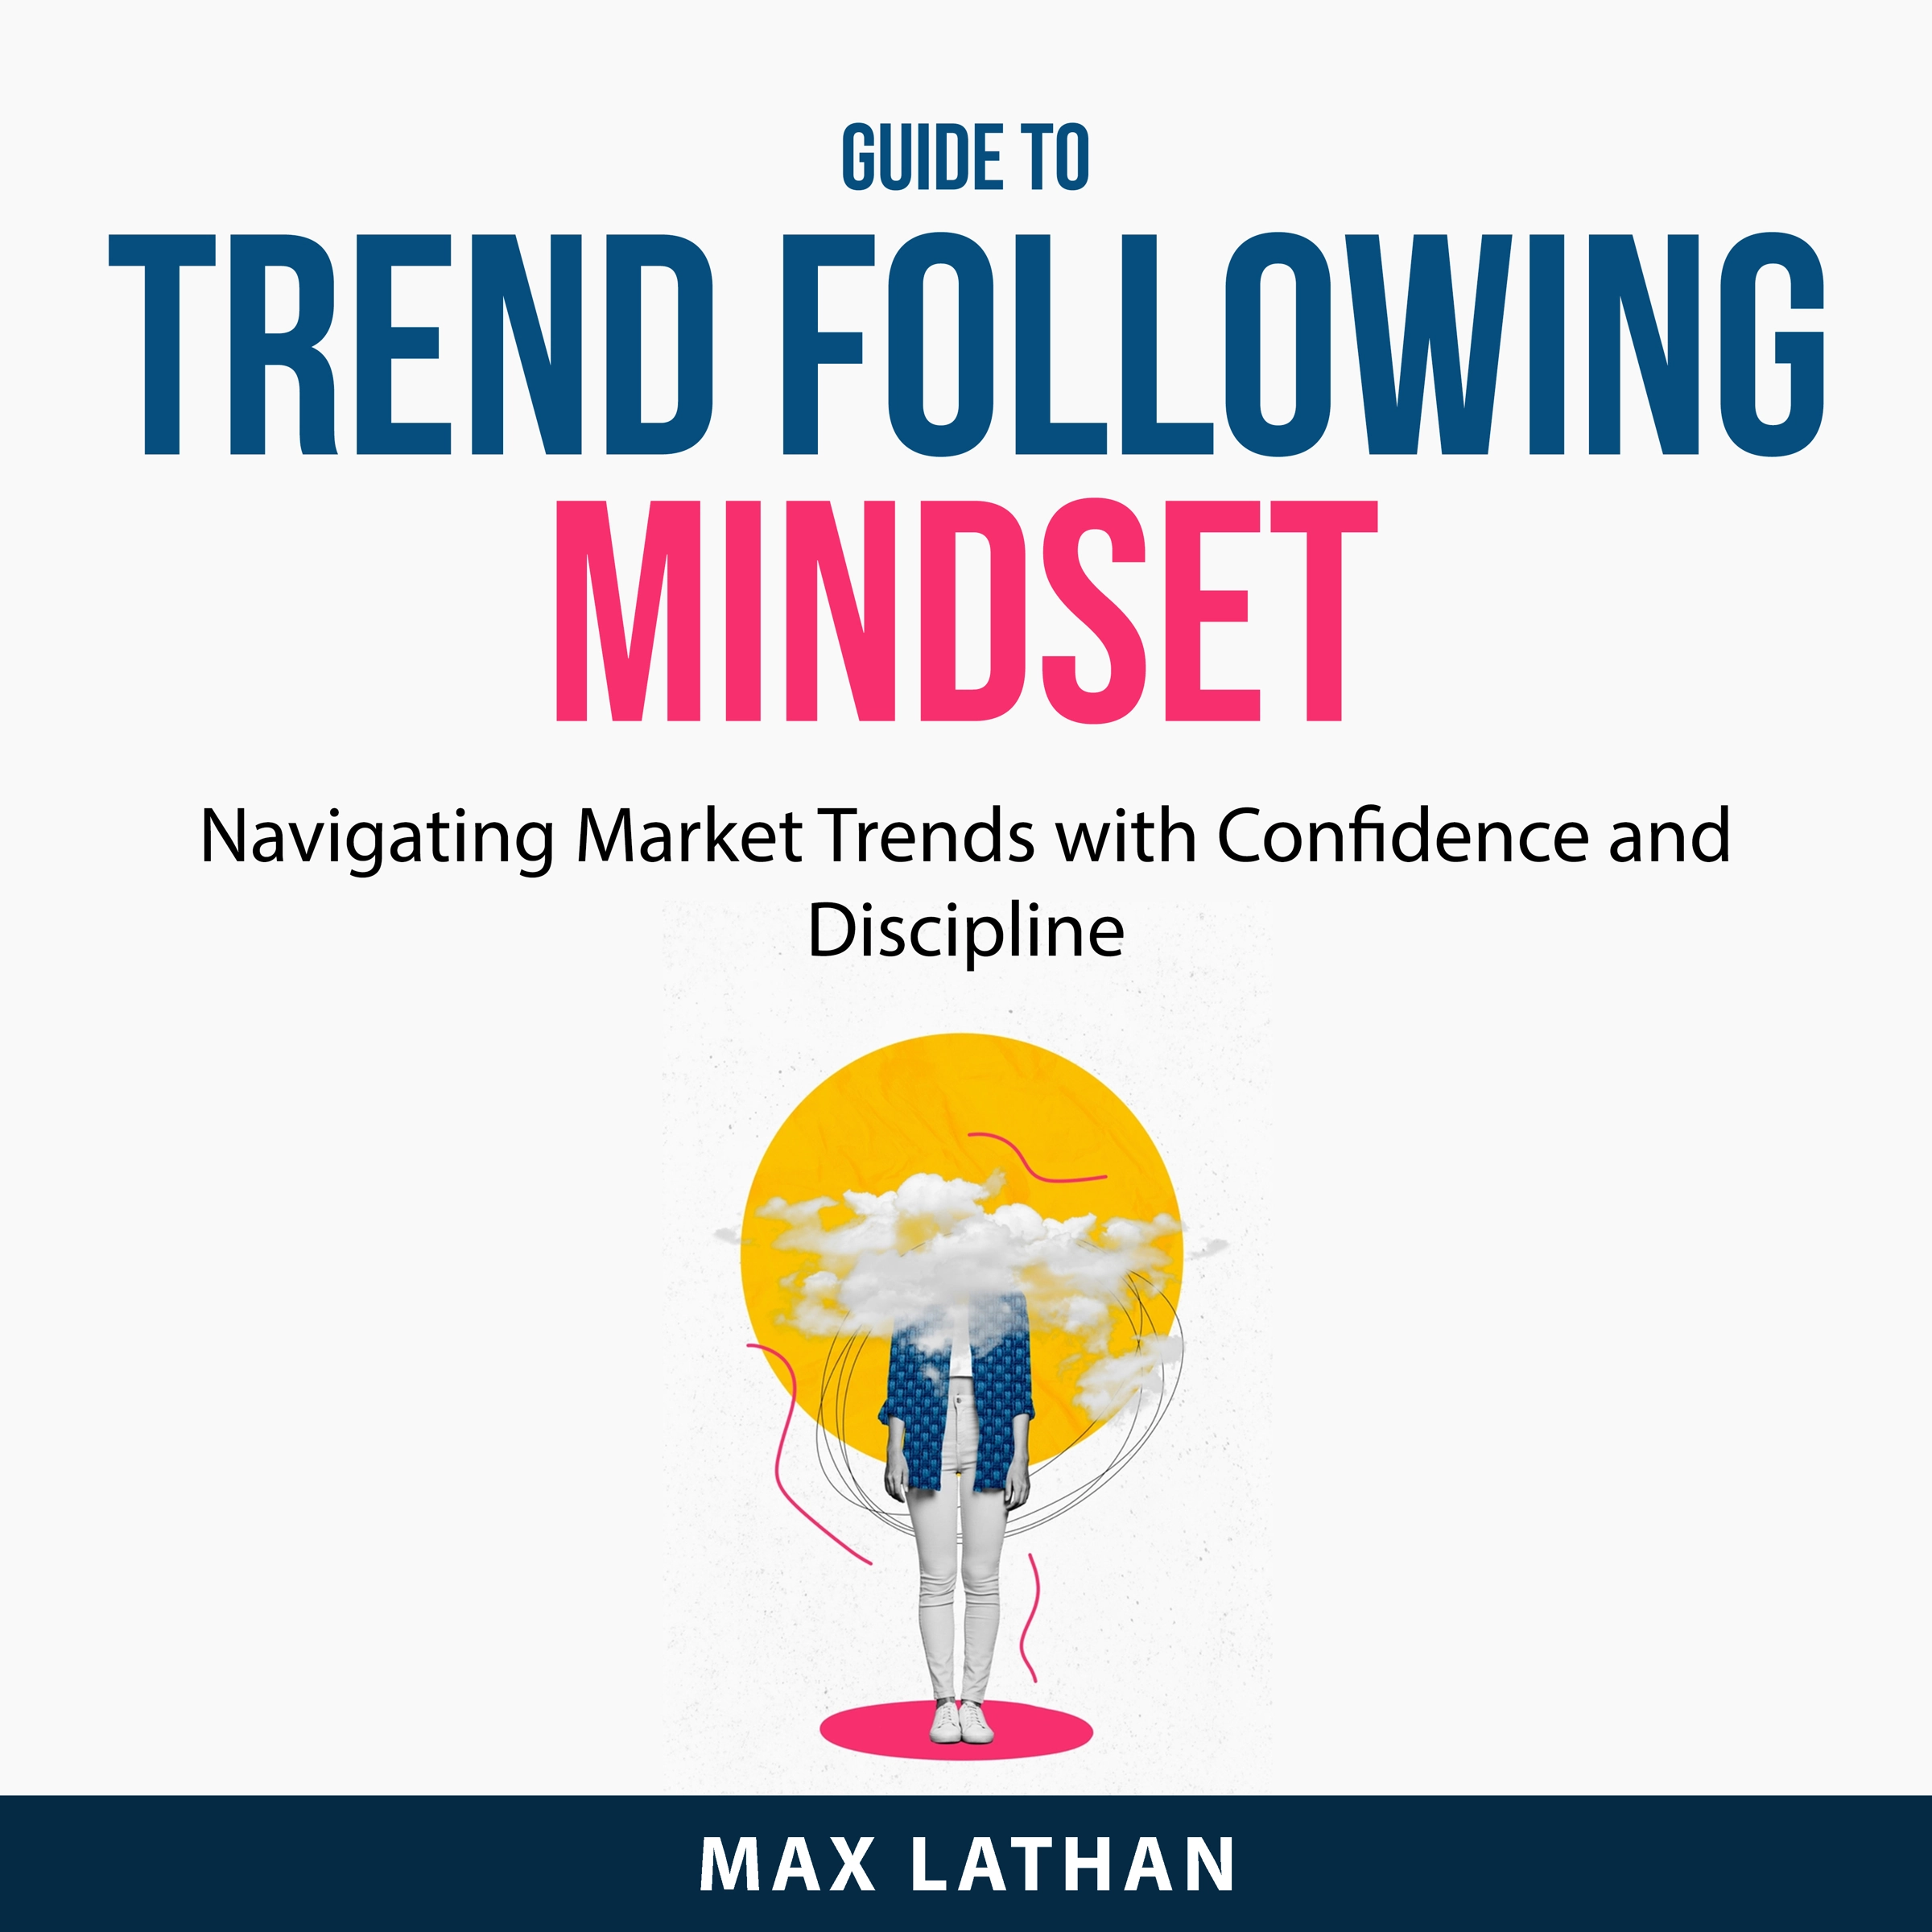 Guide to Trend Following Mindset by Max Lathan Audiobook